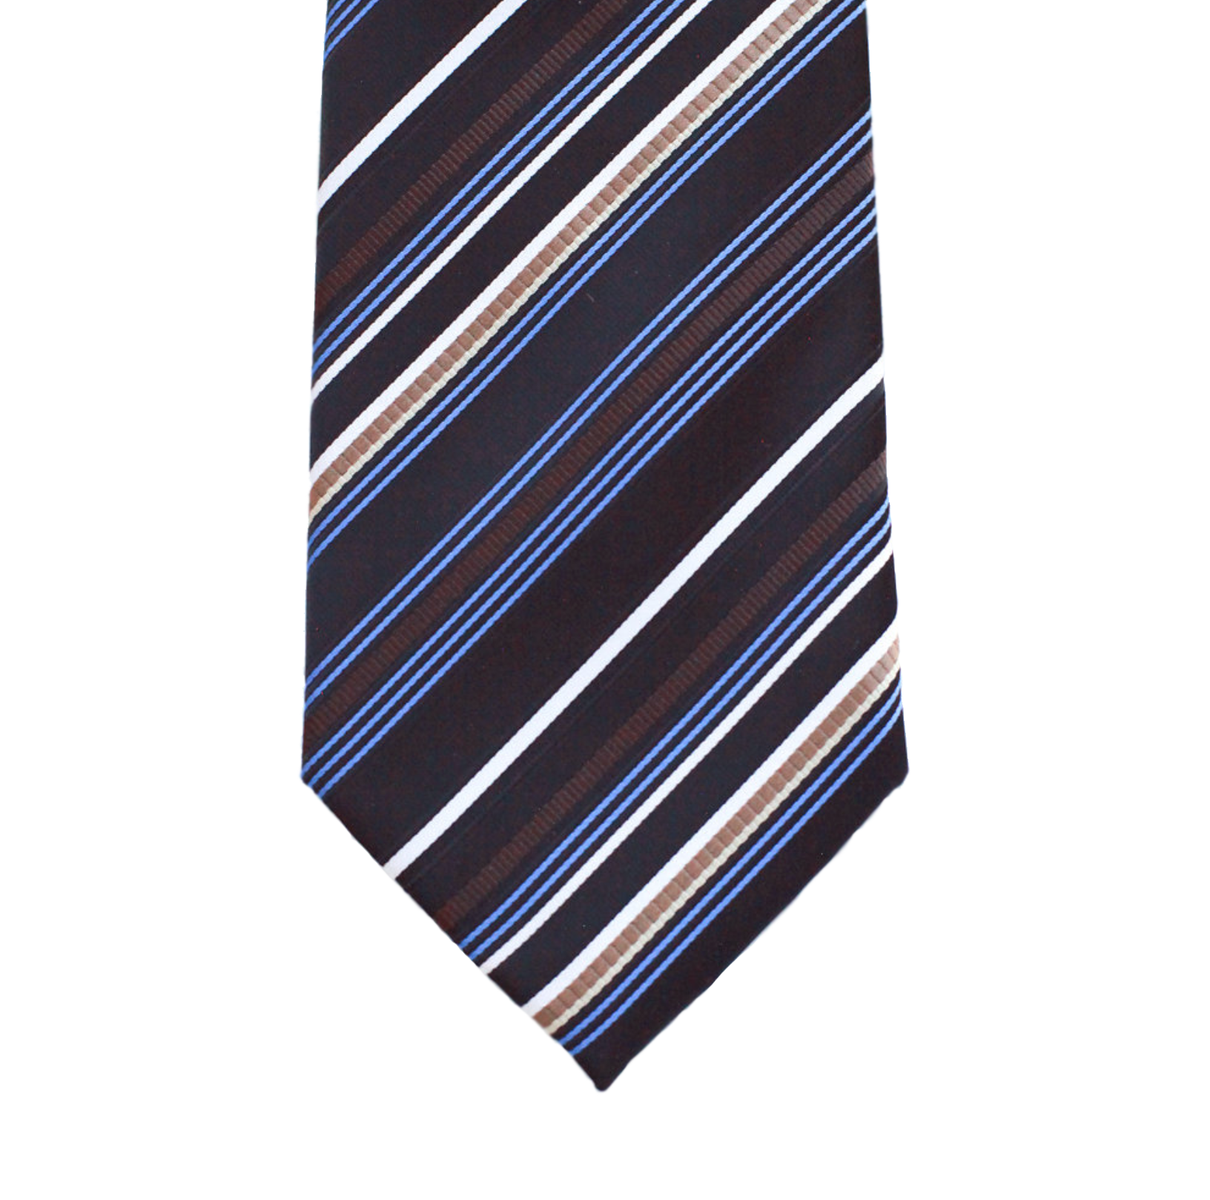 WF10 - Black with Multi Colored Stripes Adult - Standard Width